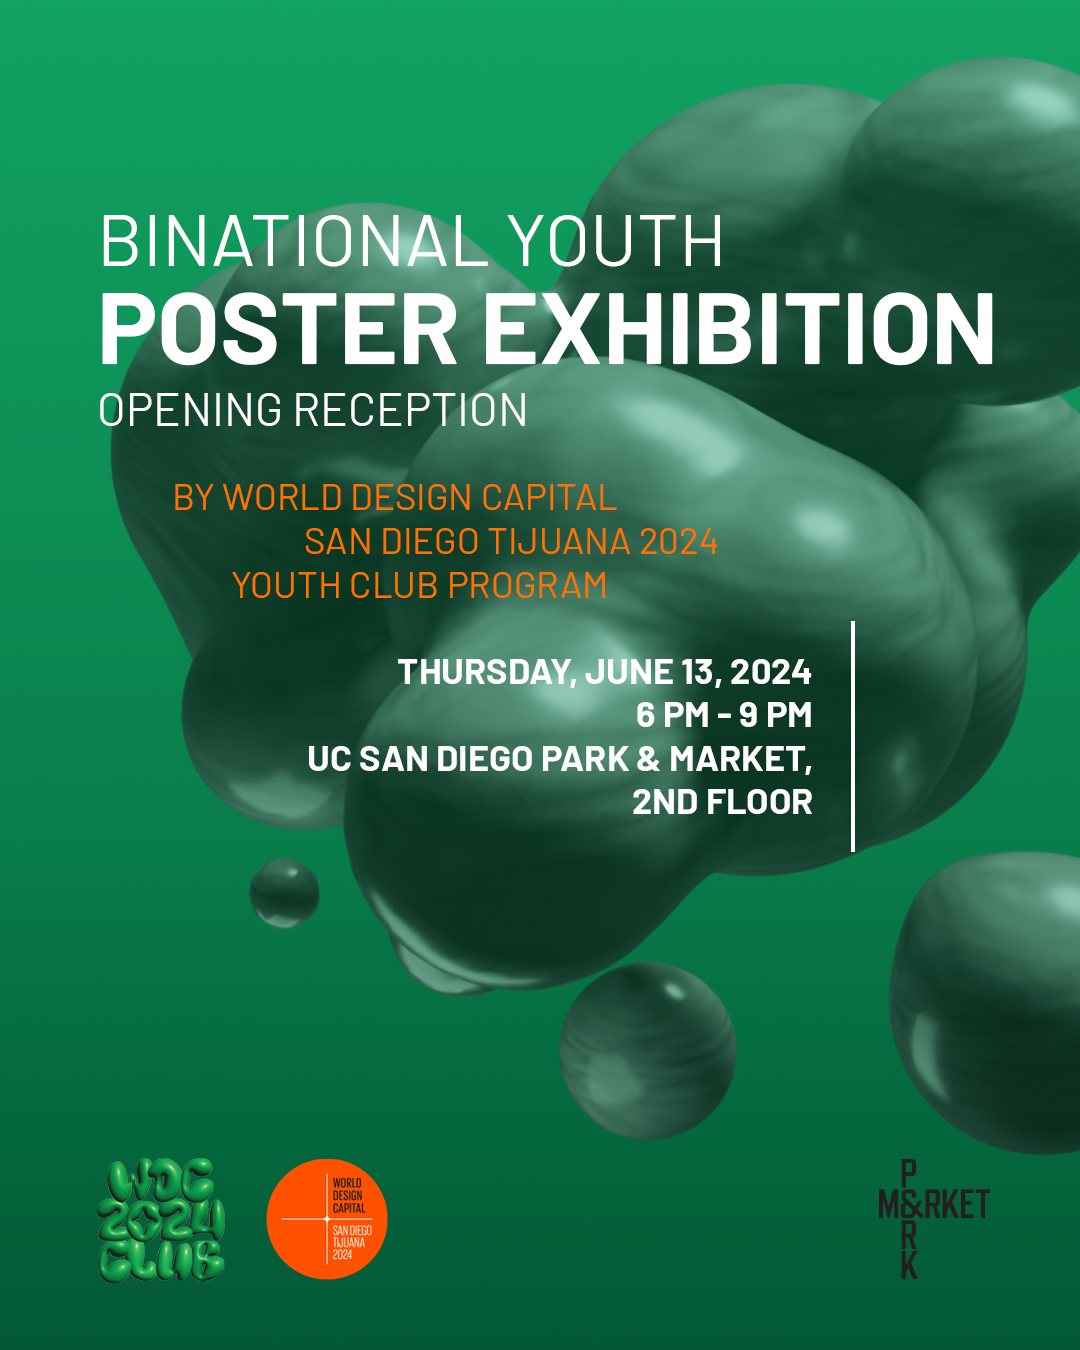 https://wdc2024.org/wp-content/uploads/2024/05/binational-youth-poster-exhibition.png